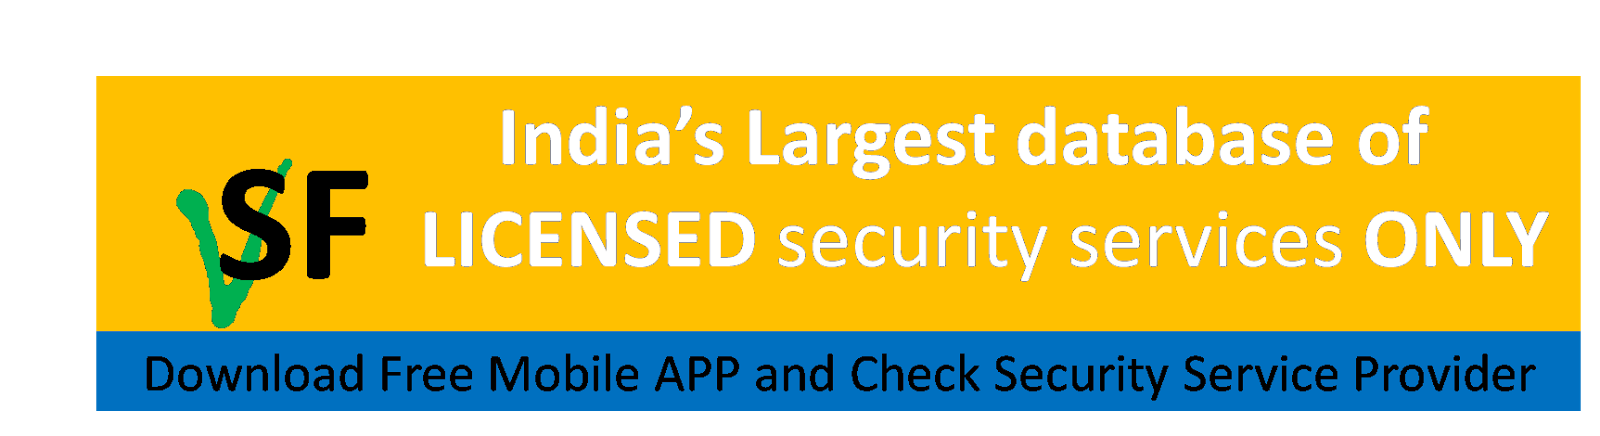 Download Free Mobile APP and Check Security Service Provider